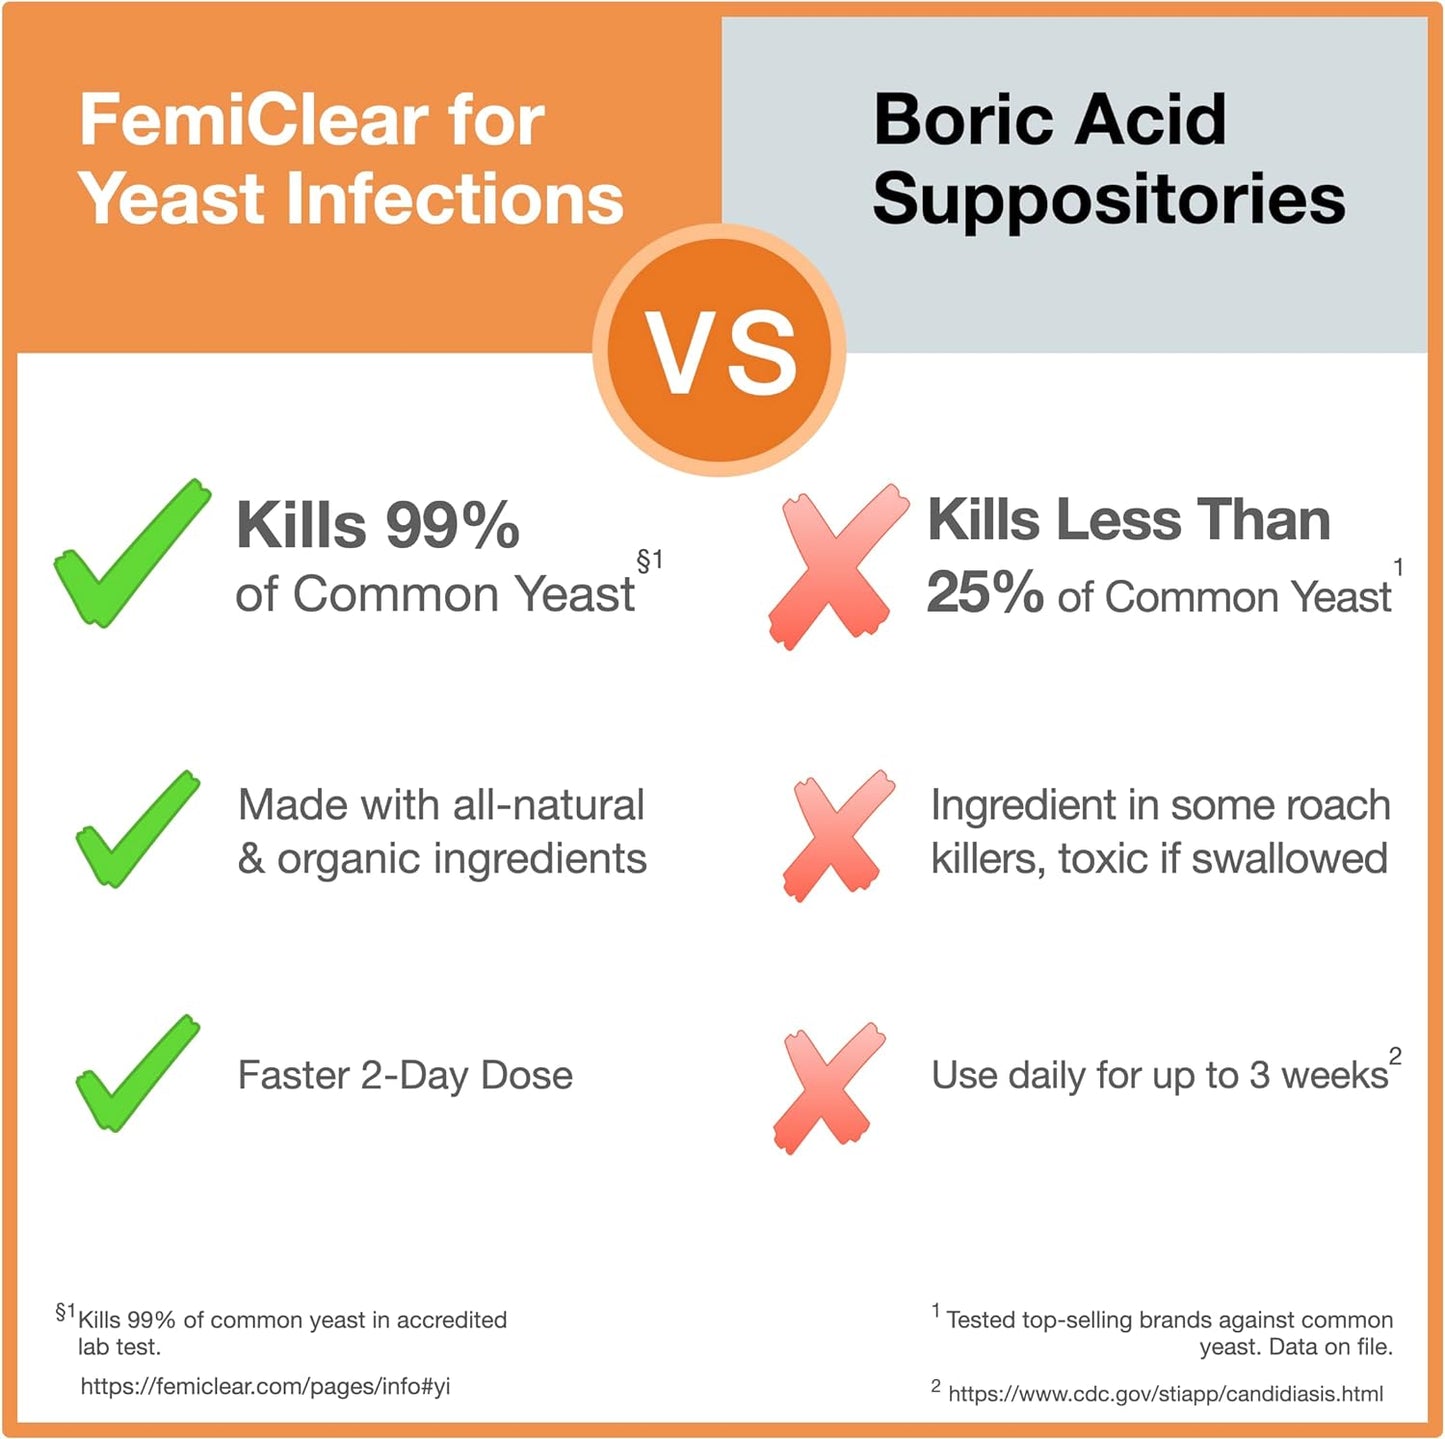 Yeast Infection - 2 Day Dose | PLUS Itch Relief | FemiClear®